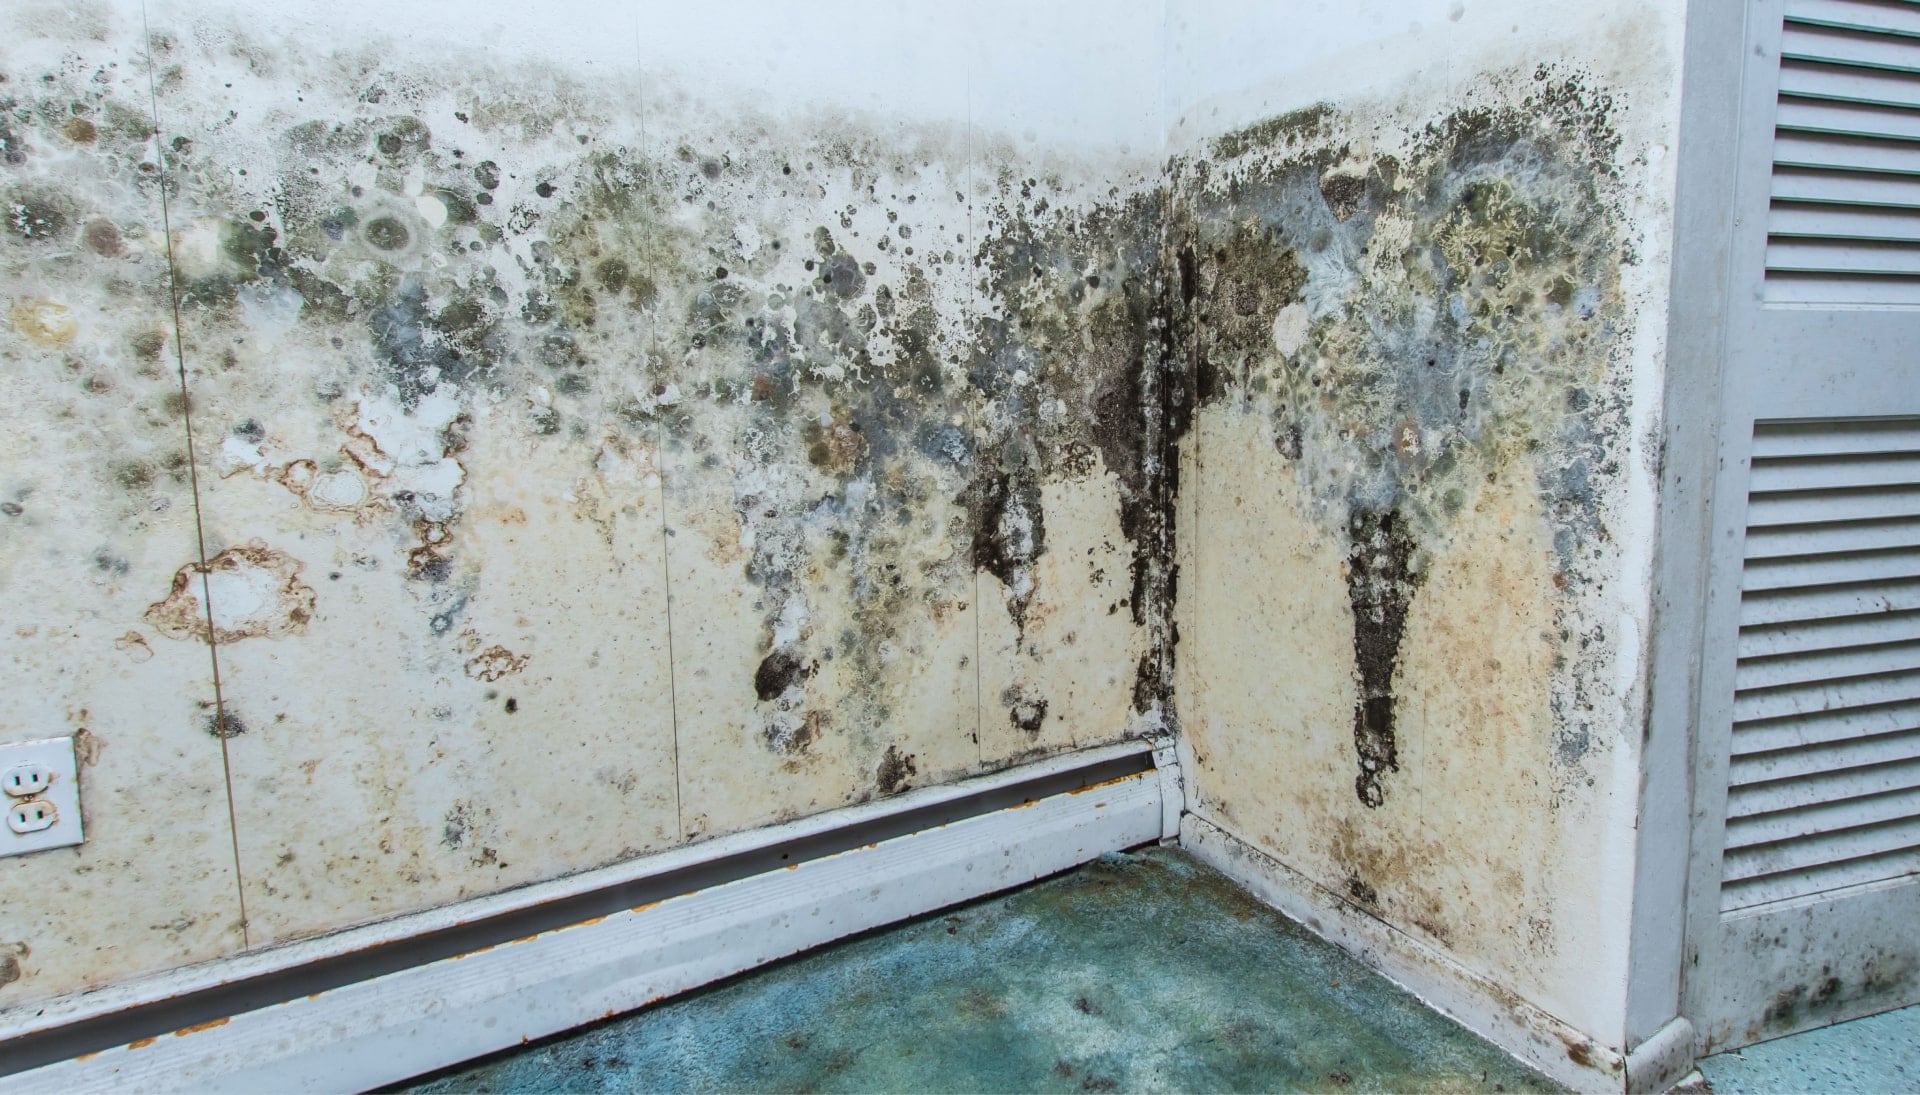 Professional mold removal, odor control, and water damage restoration service in Raleigh, North Carolina.